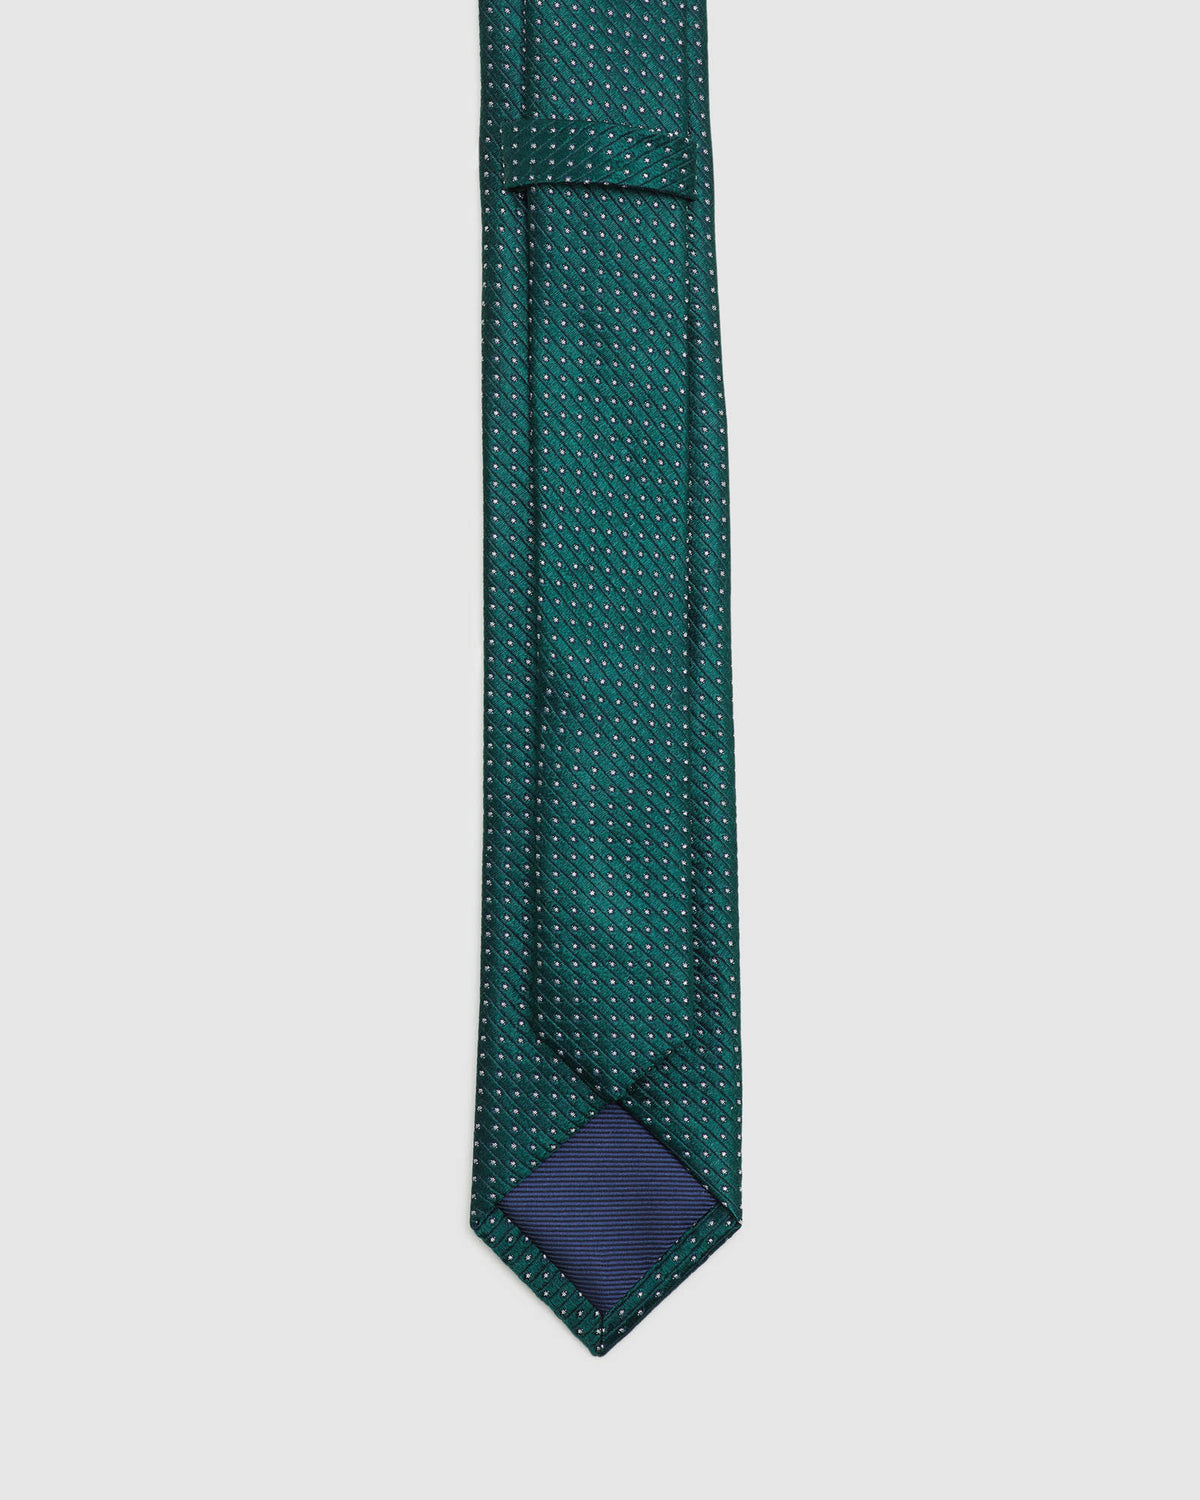 STRIPES AND DOTS SKINNY SILK TIE MENS ACCESSORIES